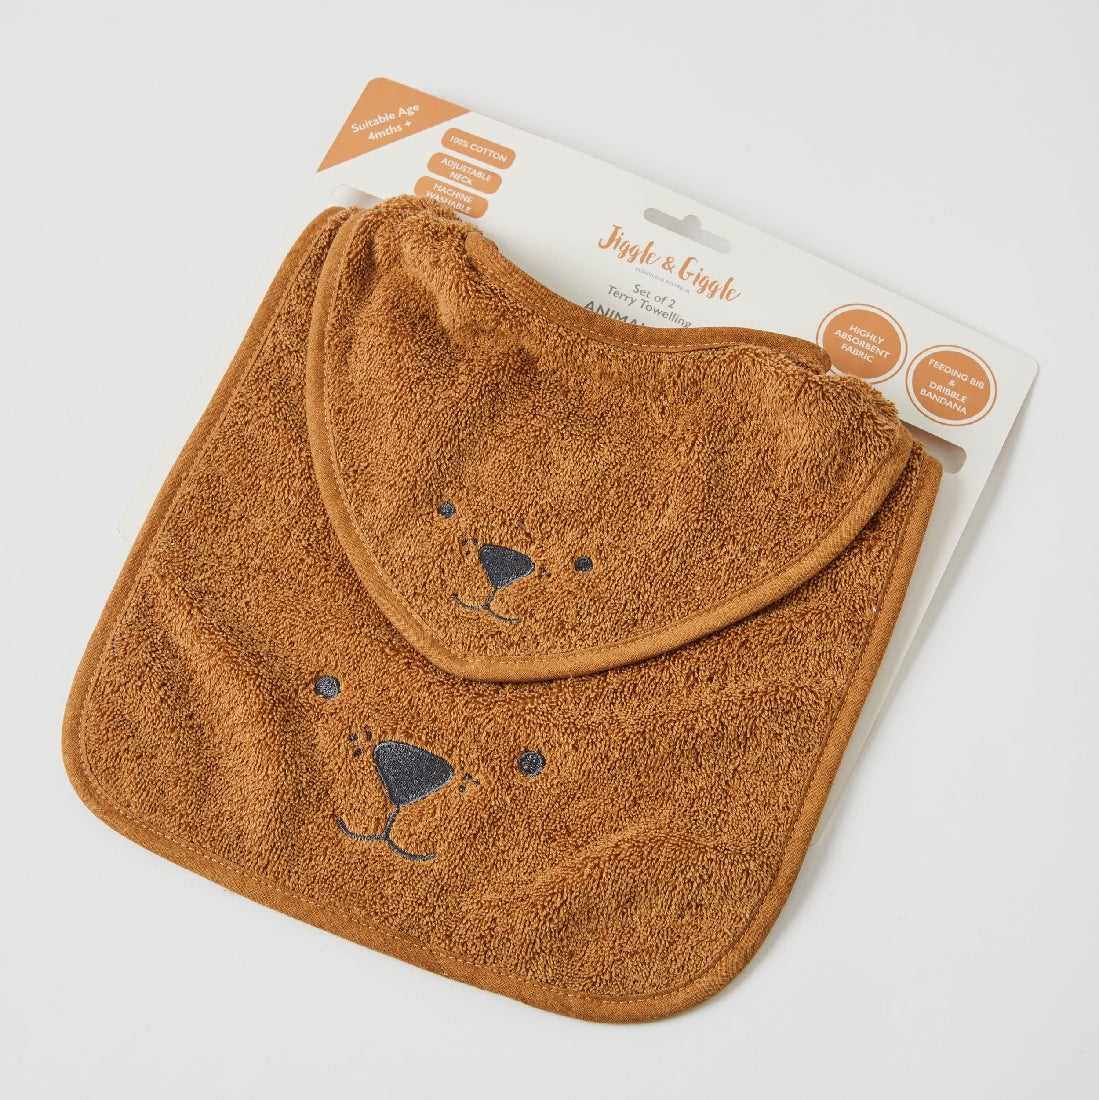 Jiggle & Giggle | Terry Towelling Animal Faces Bibs Set